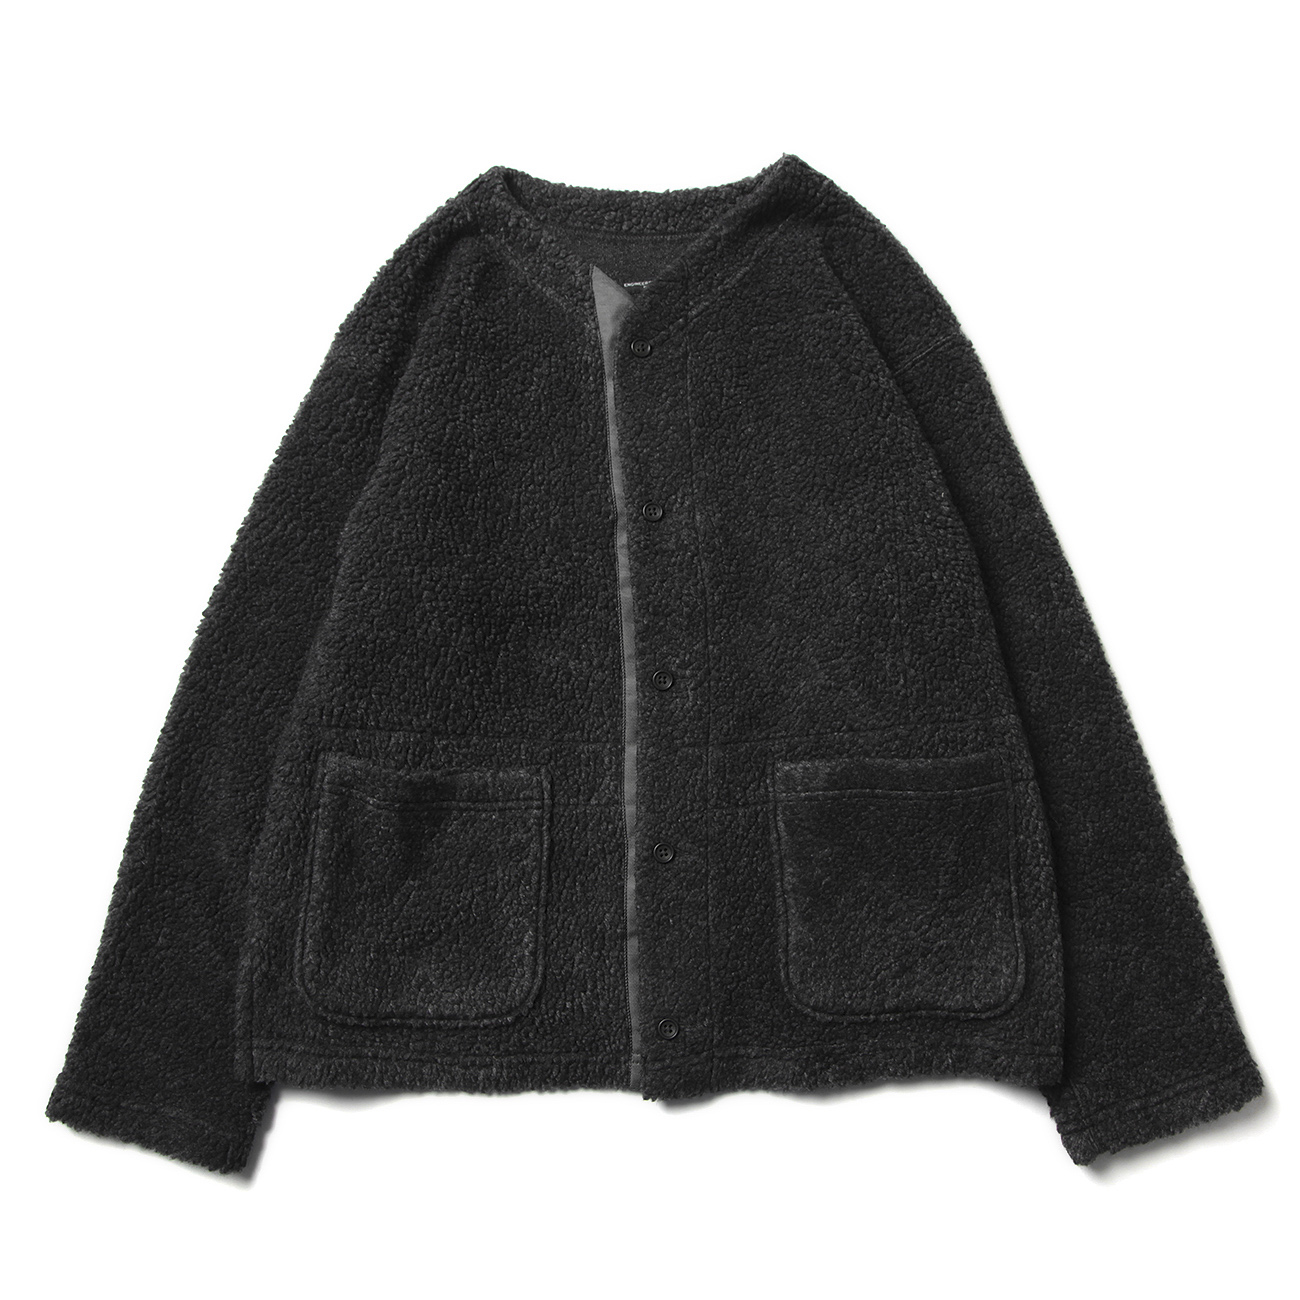 Knit Cardigan - Wool Poly Shaggy Knit - Charcoal